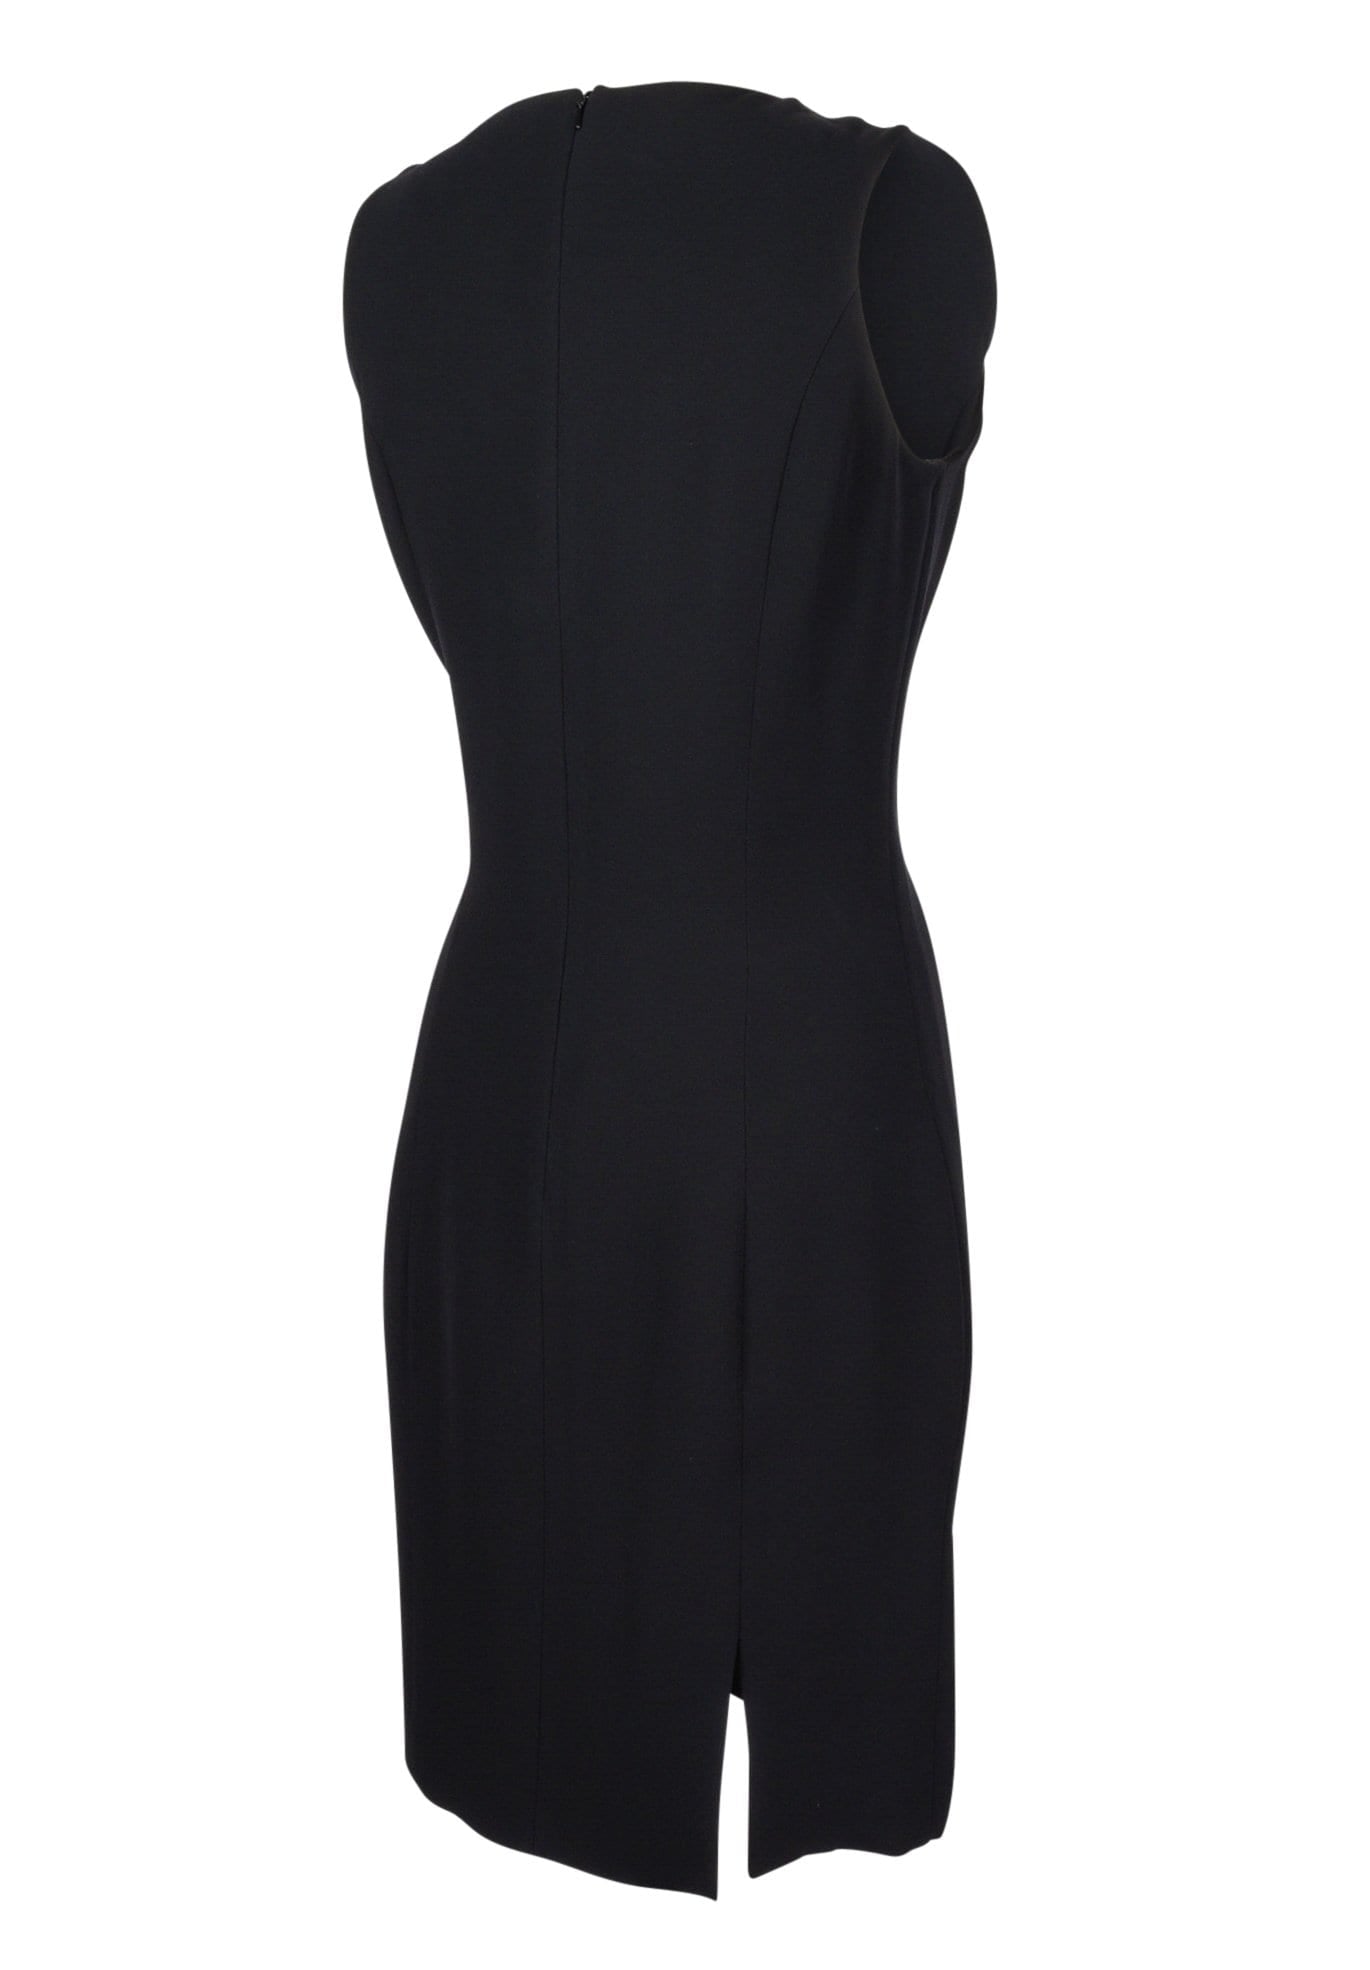 Christian Dior Dress Black Navy Pleated Inset Detail fits 8